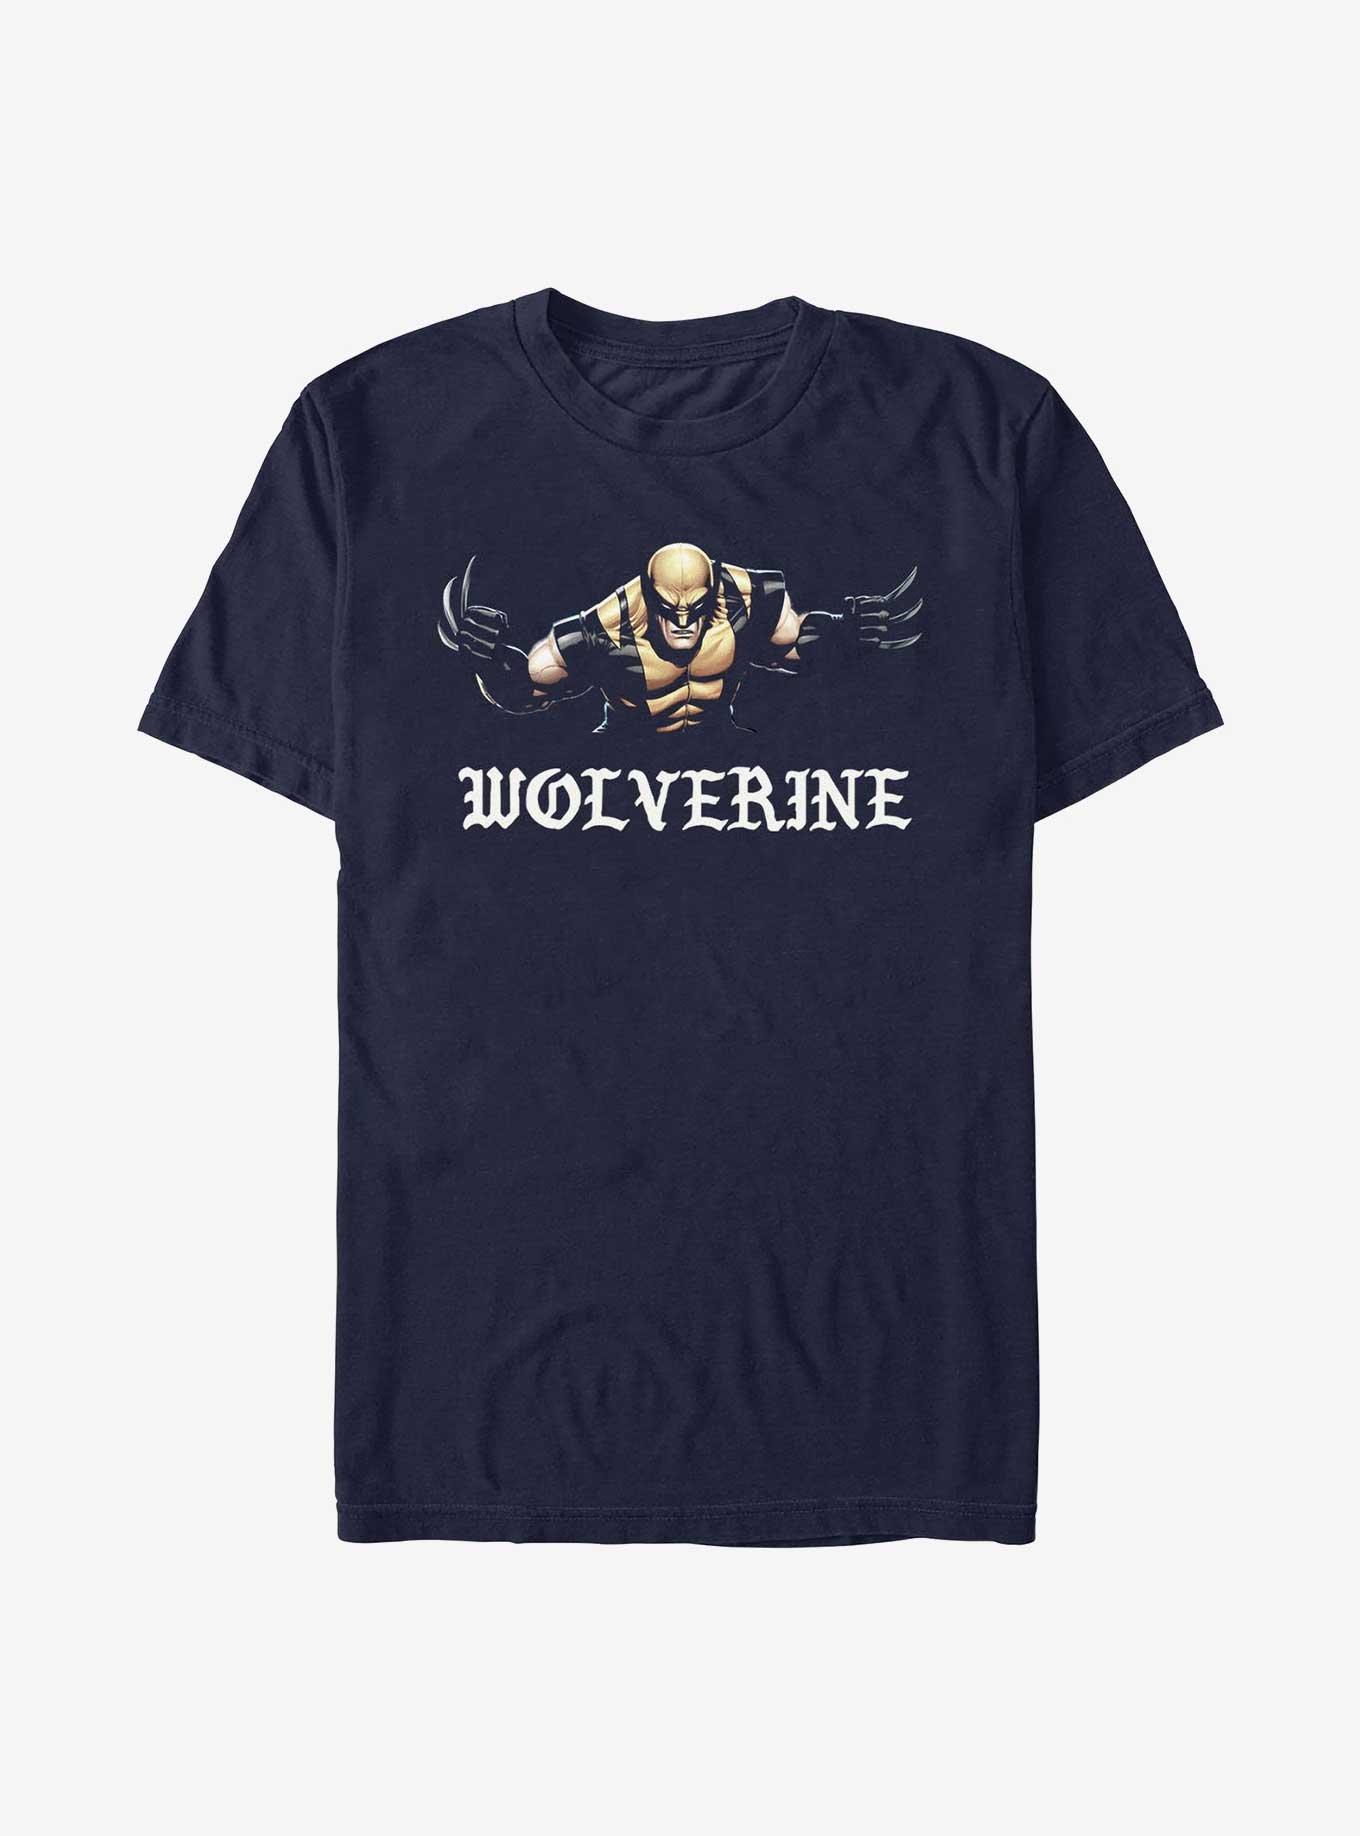 Wolverine Punch With Blades T-Shirt, NAVY, hi-res